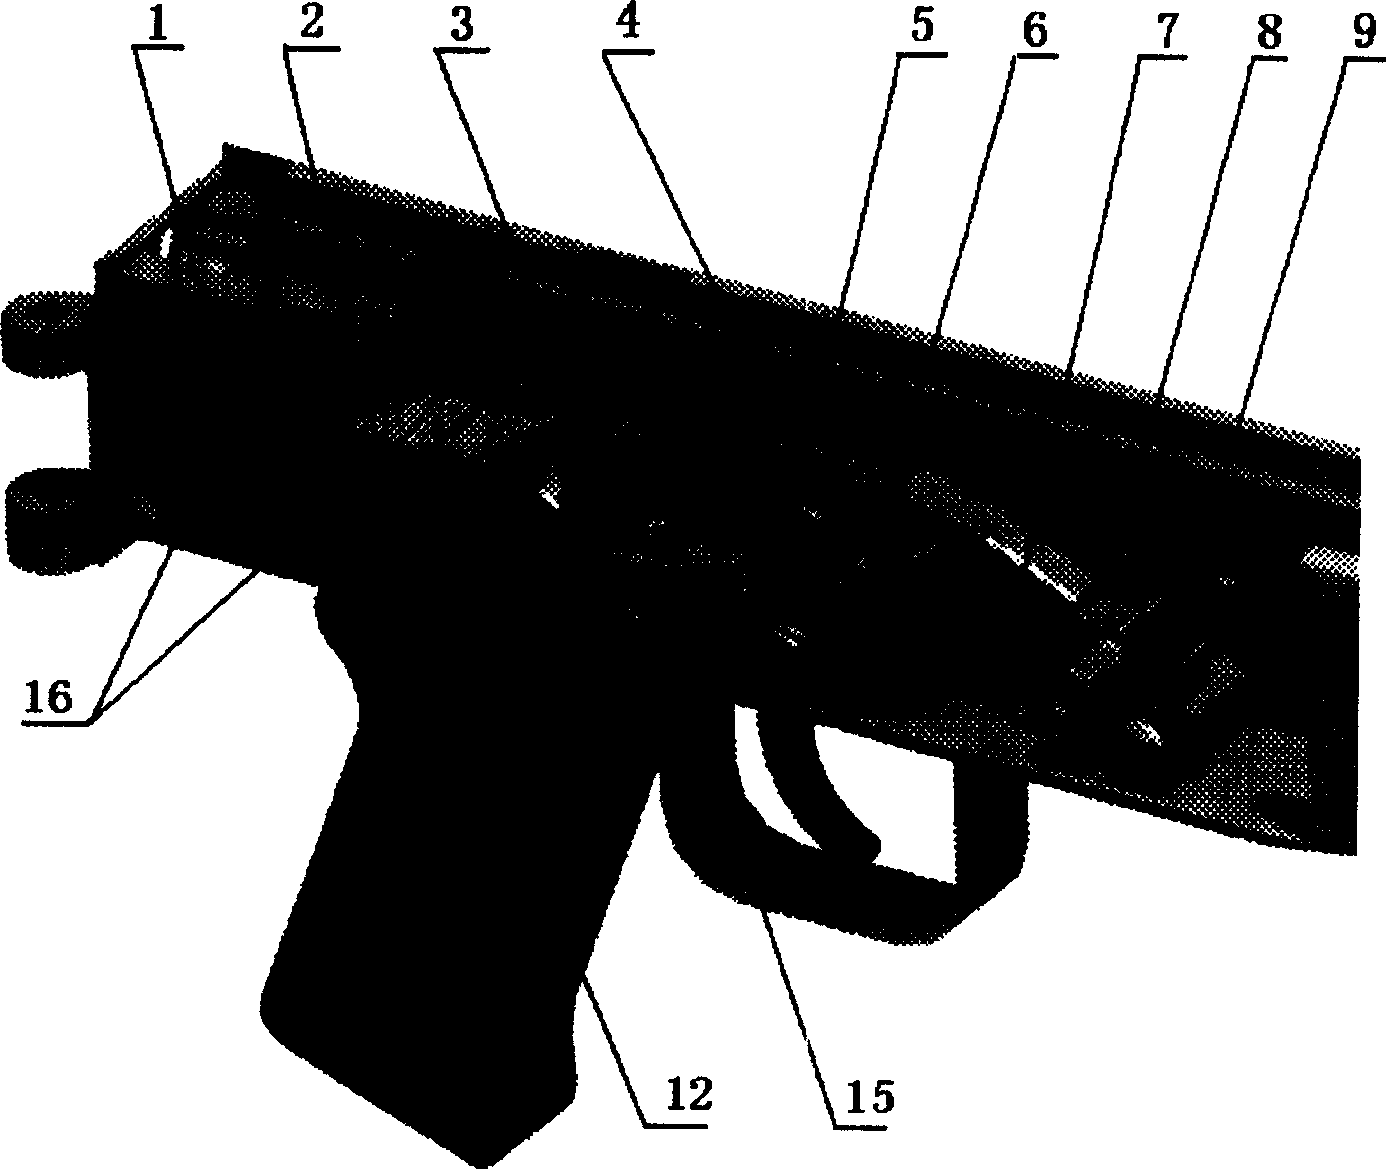 Built-in trigger lock of automatic rifle